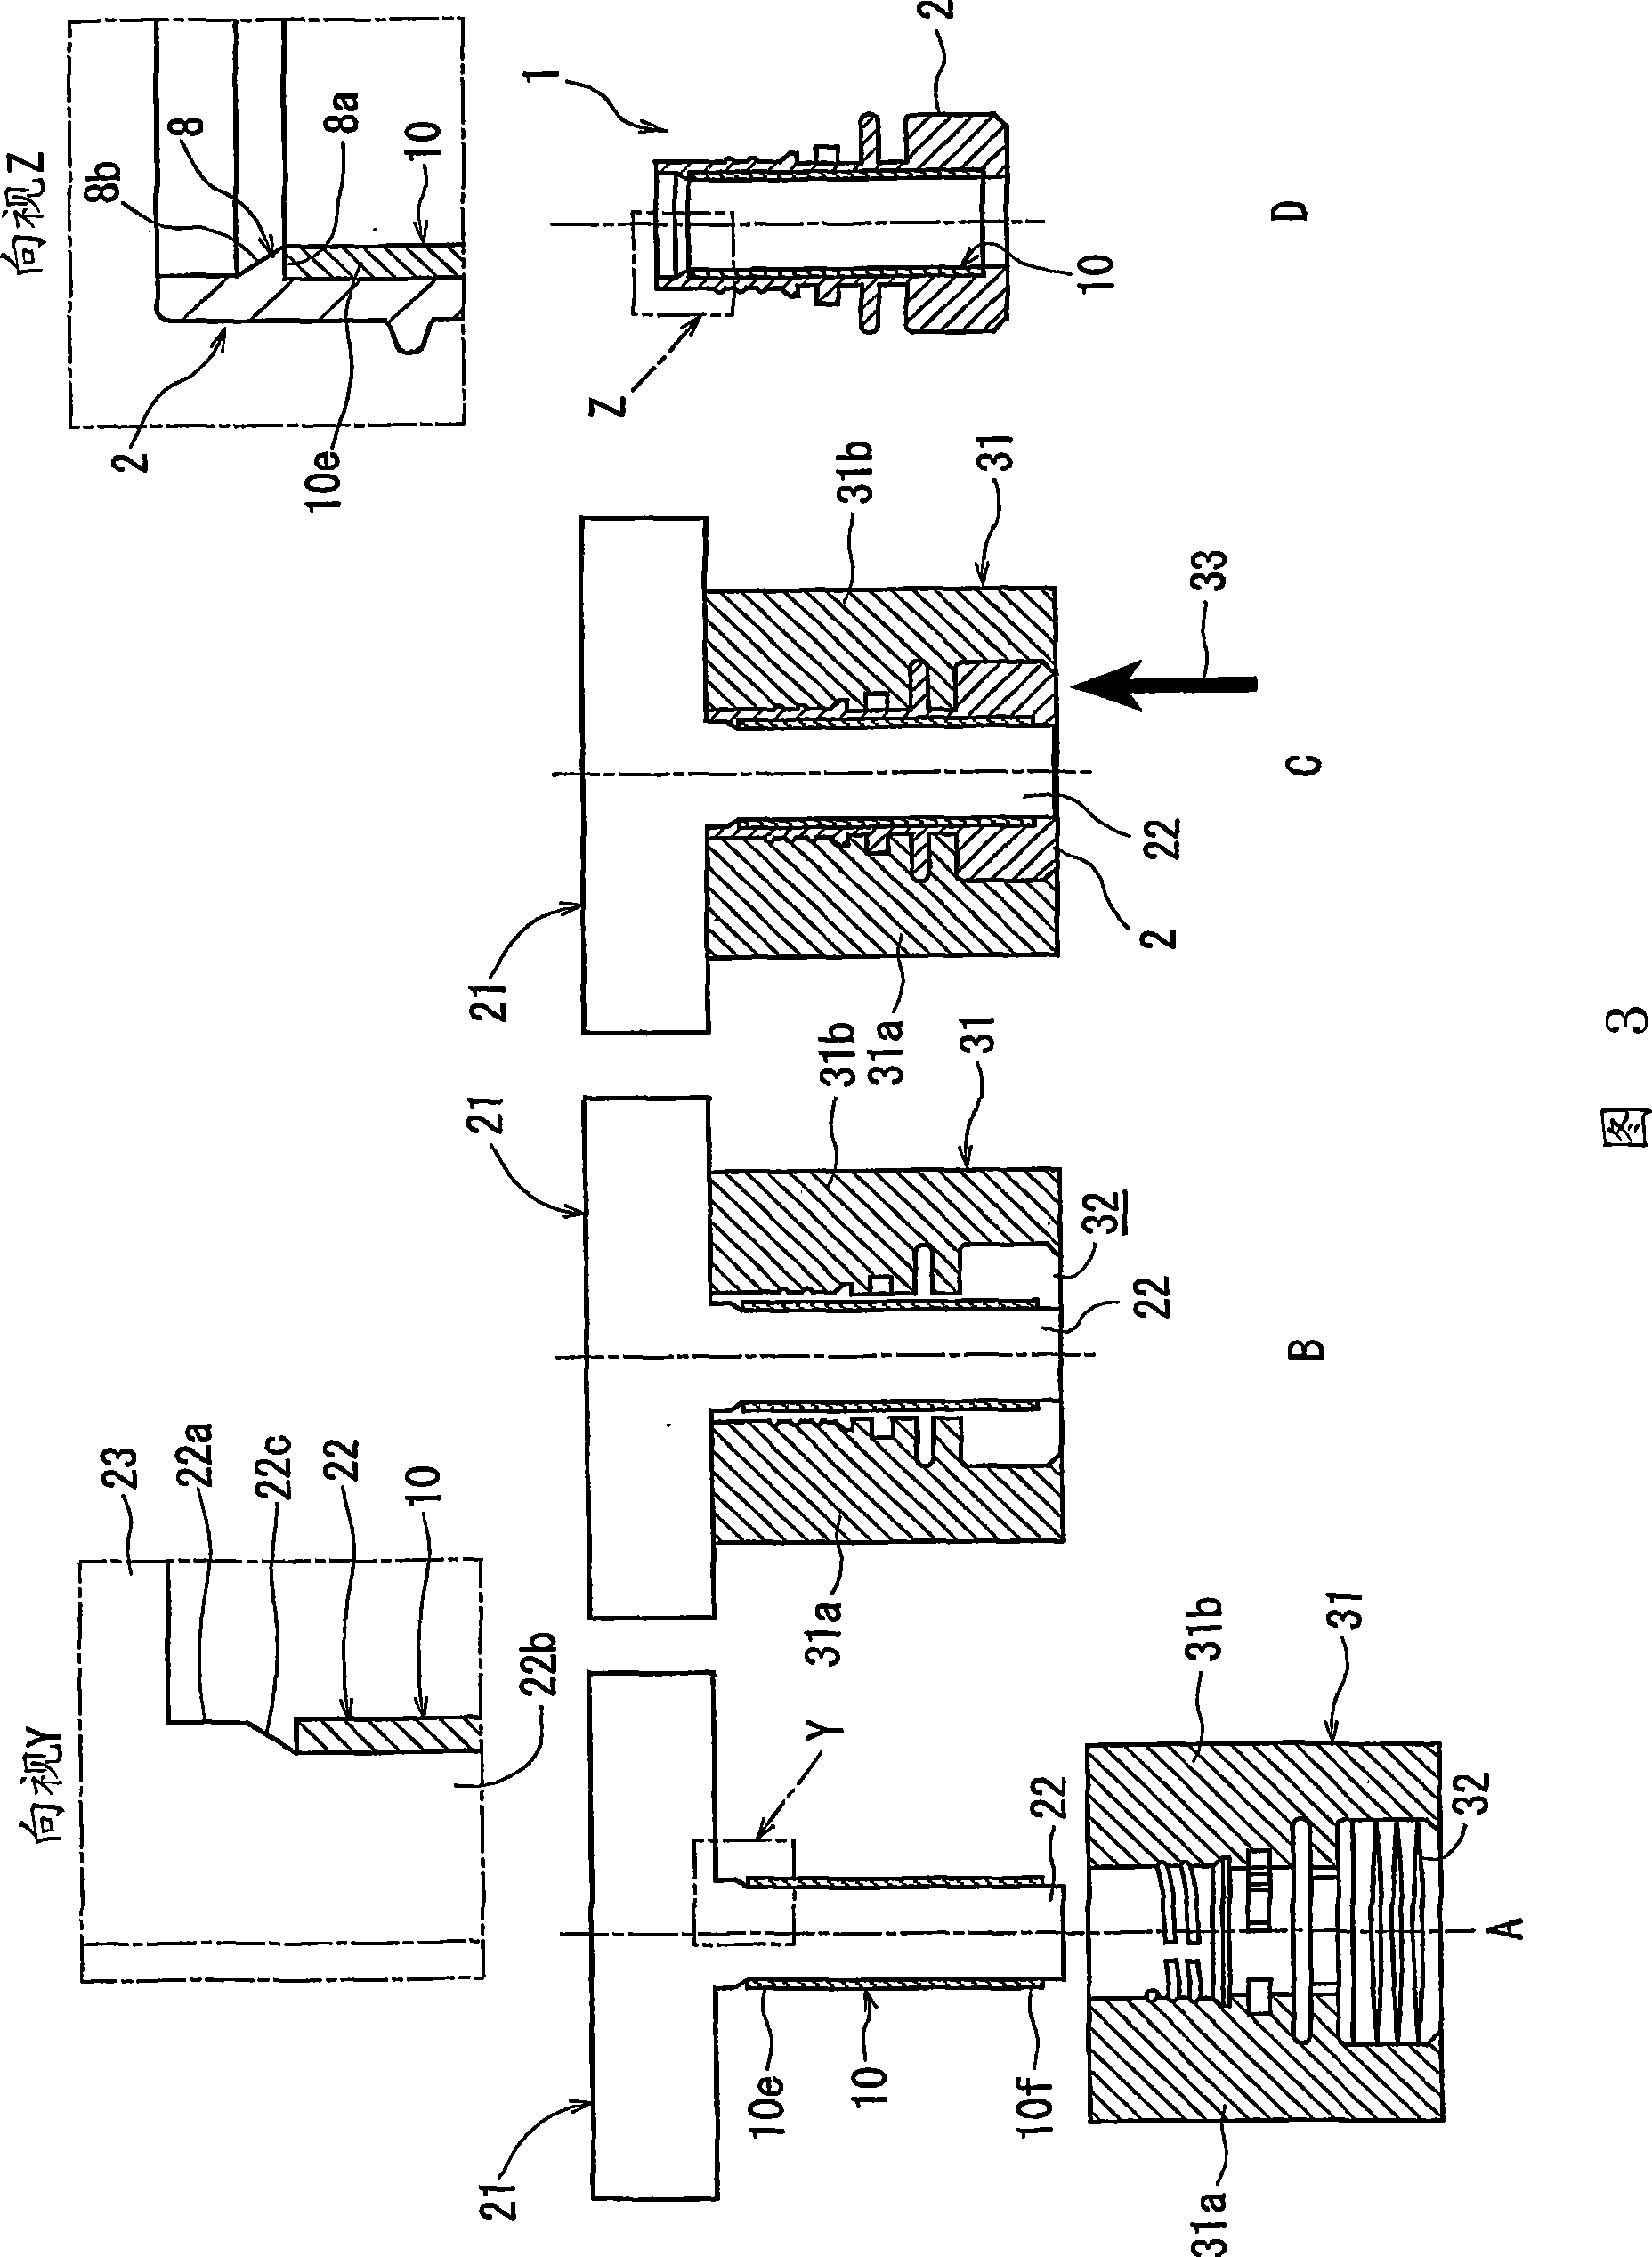 Composite spout, and injection molding device for molding the same